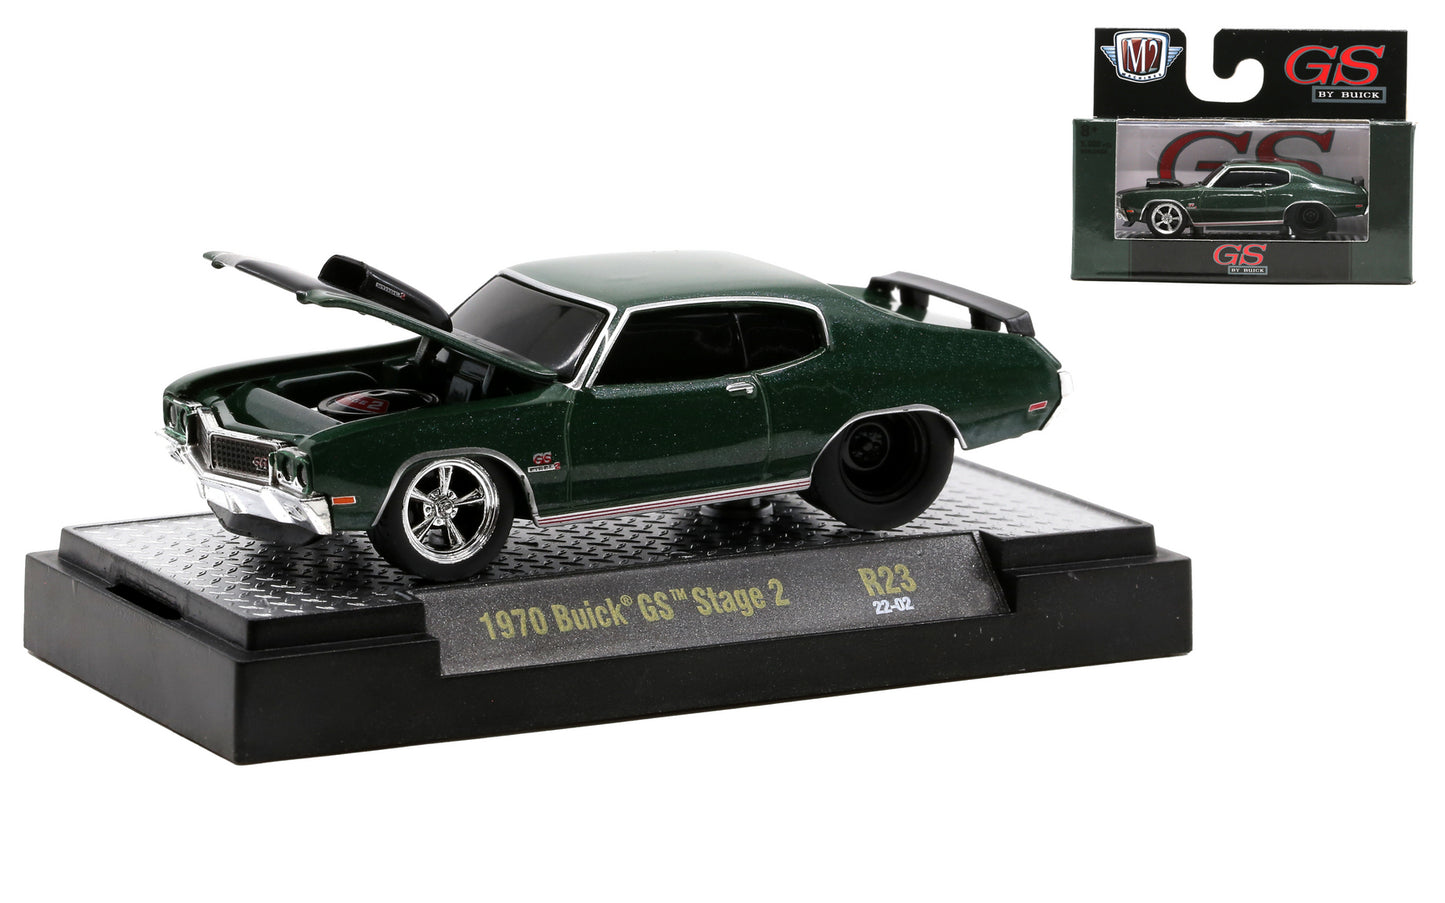 Release 23 - 1970 Buick GS Stage 2 Die Cast Model